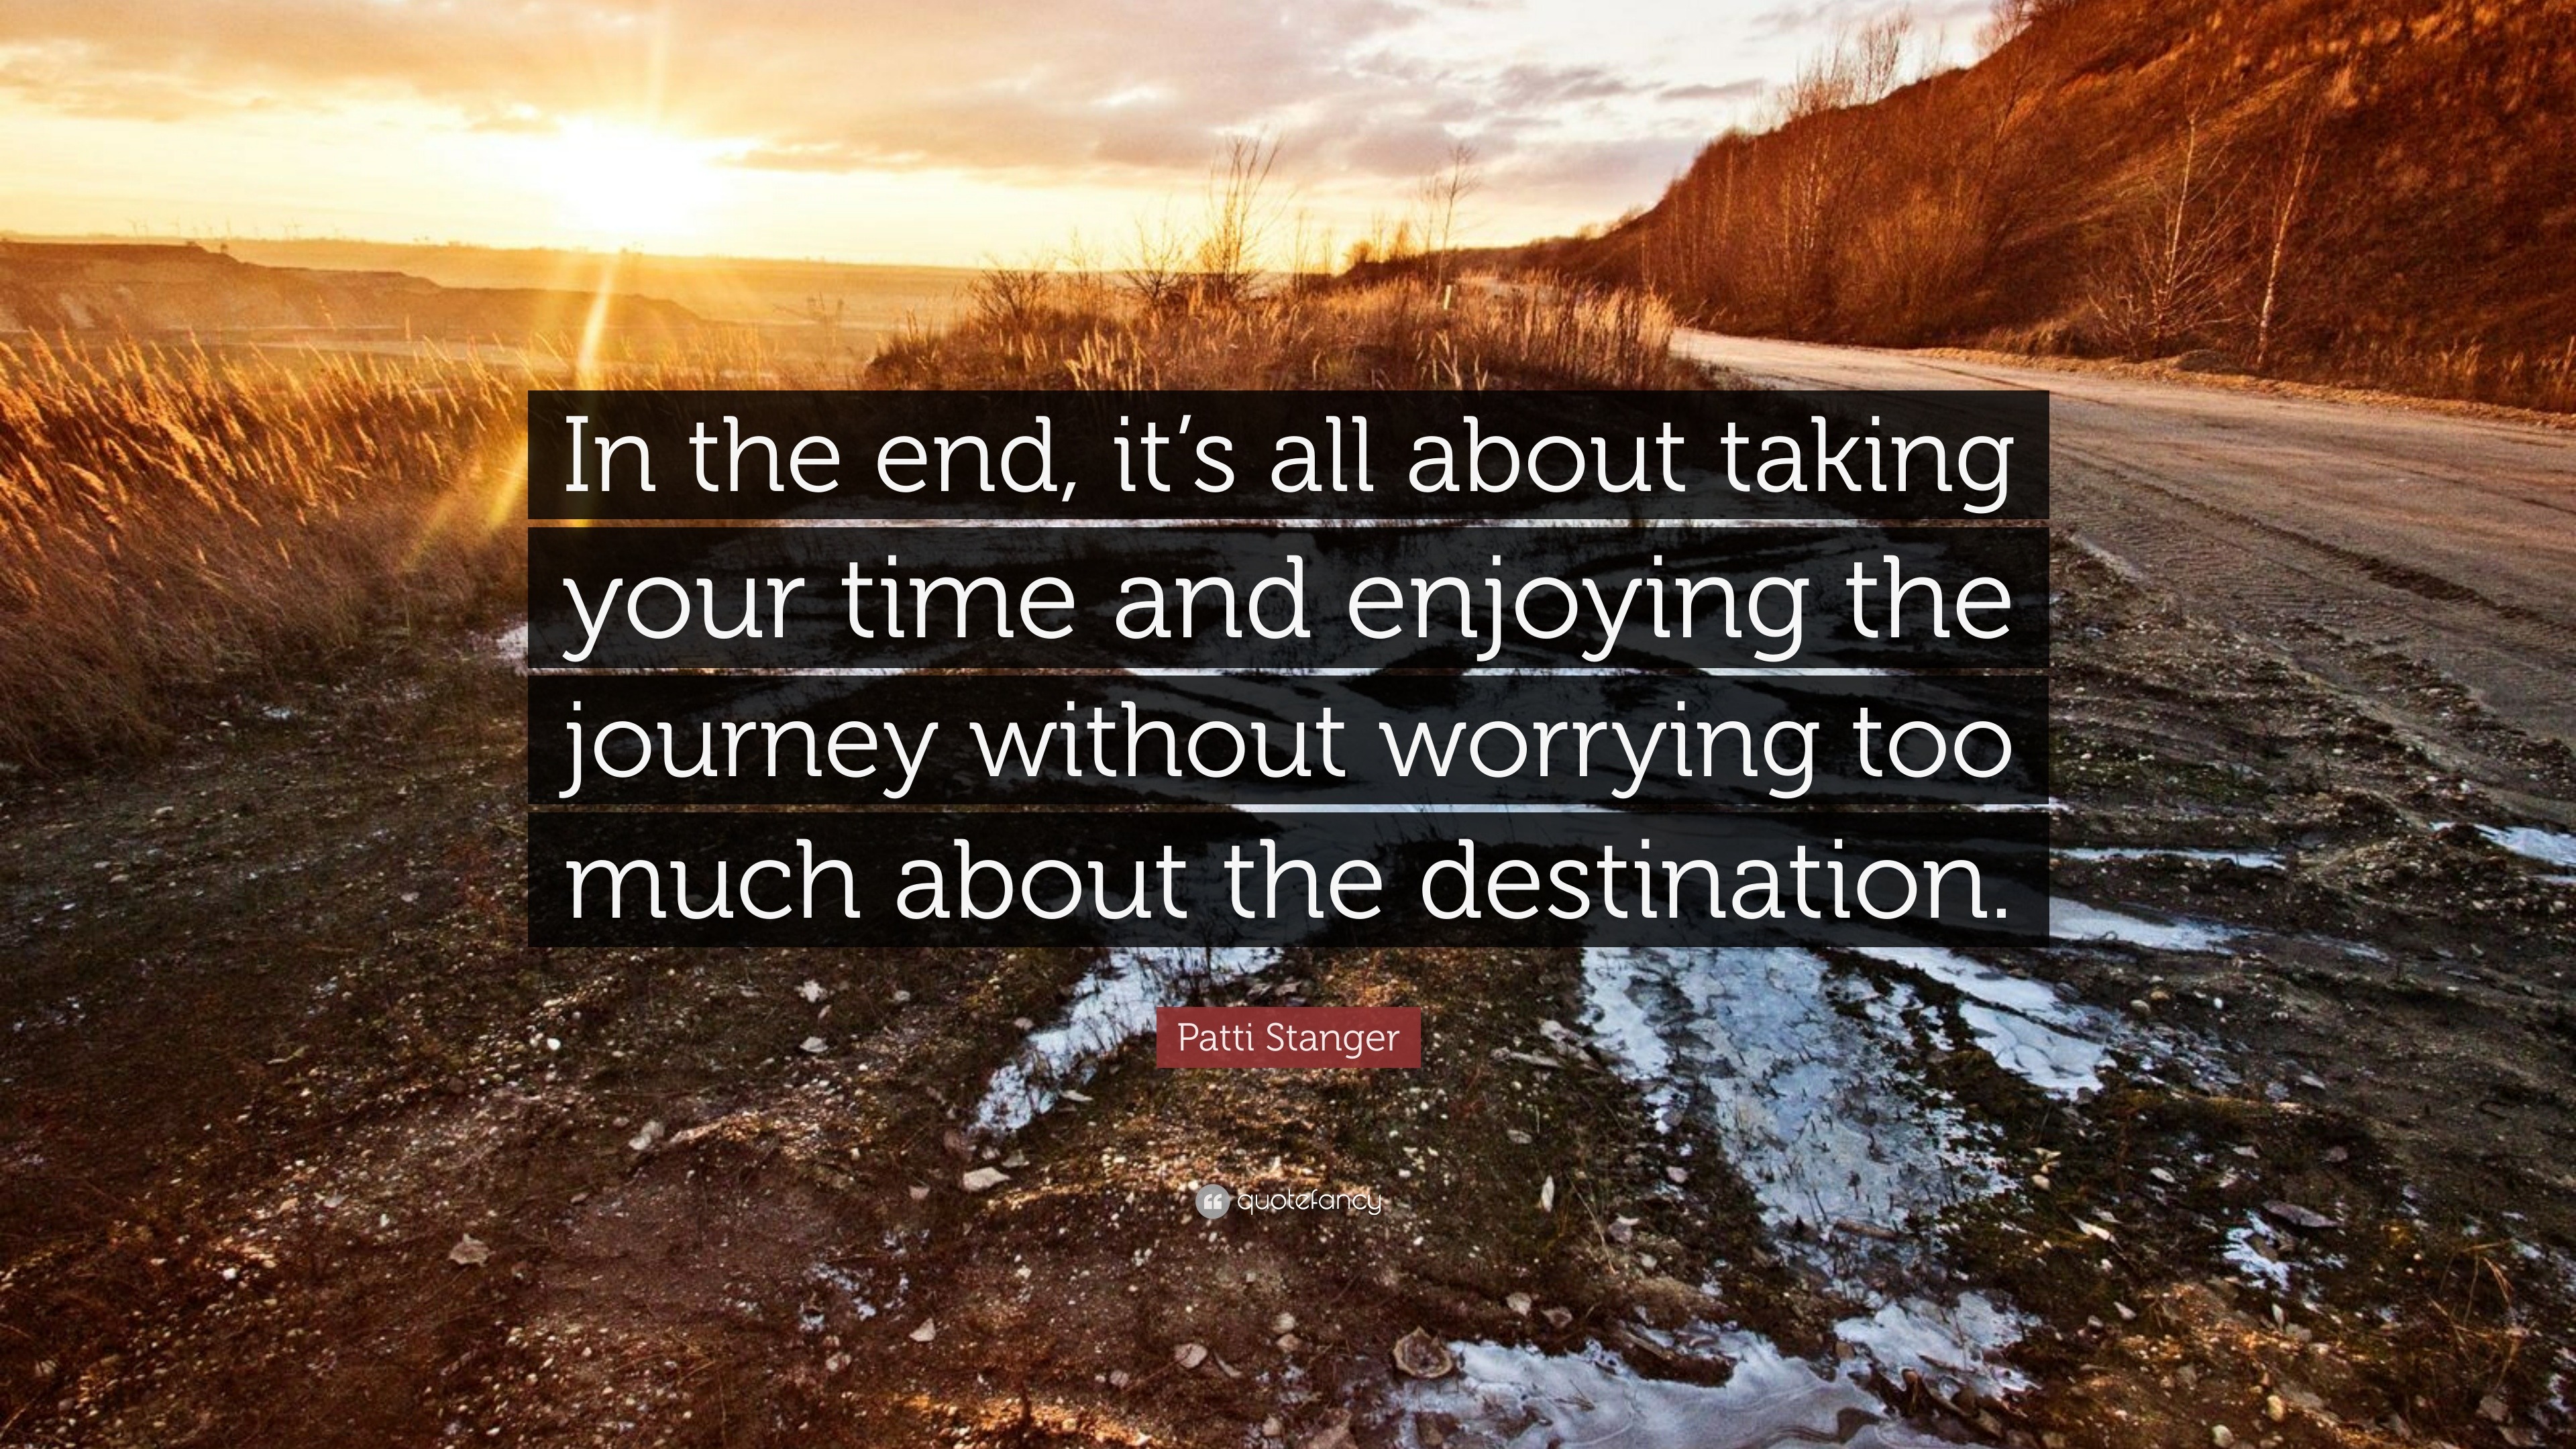 STOP focusing on the destination and START enjoying the journey.